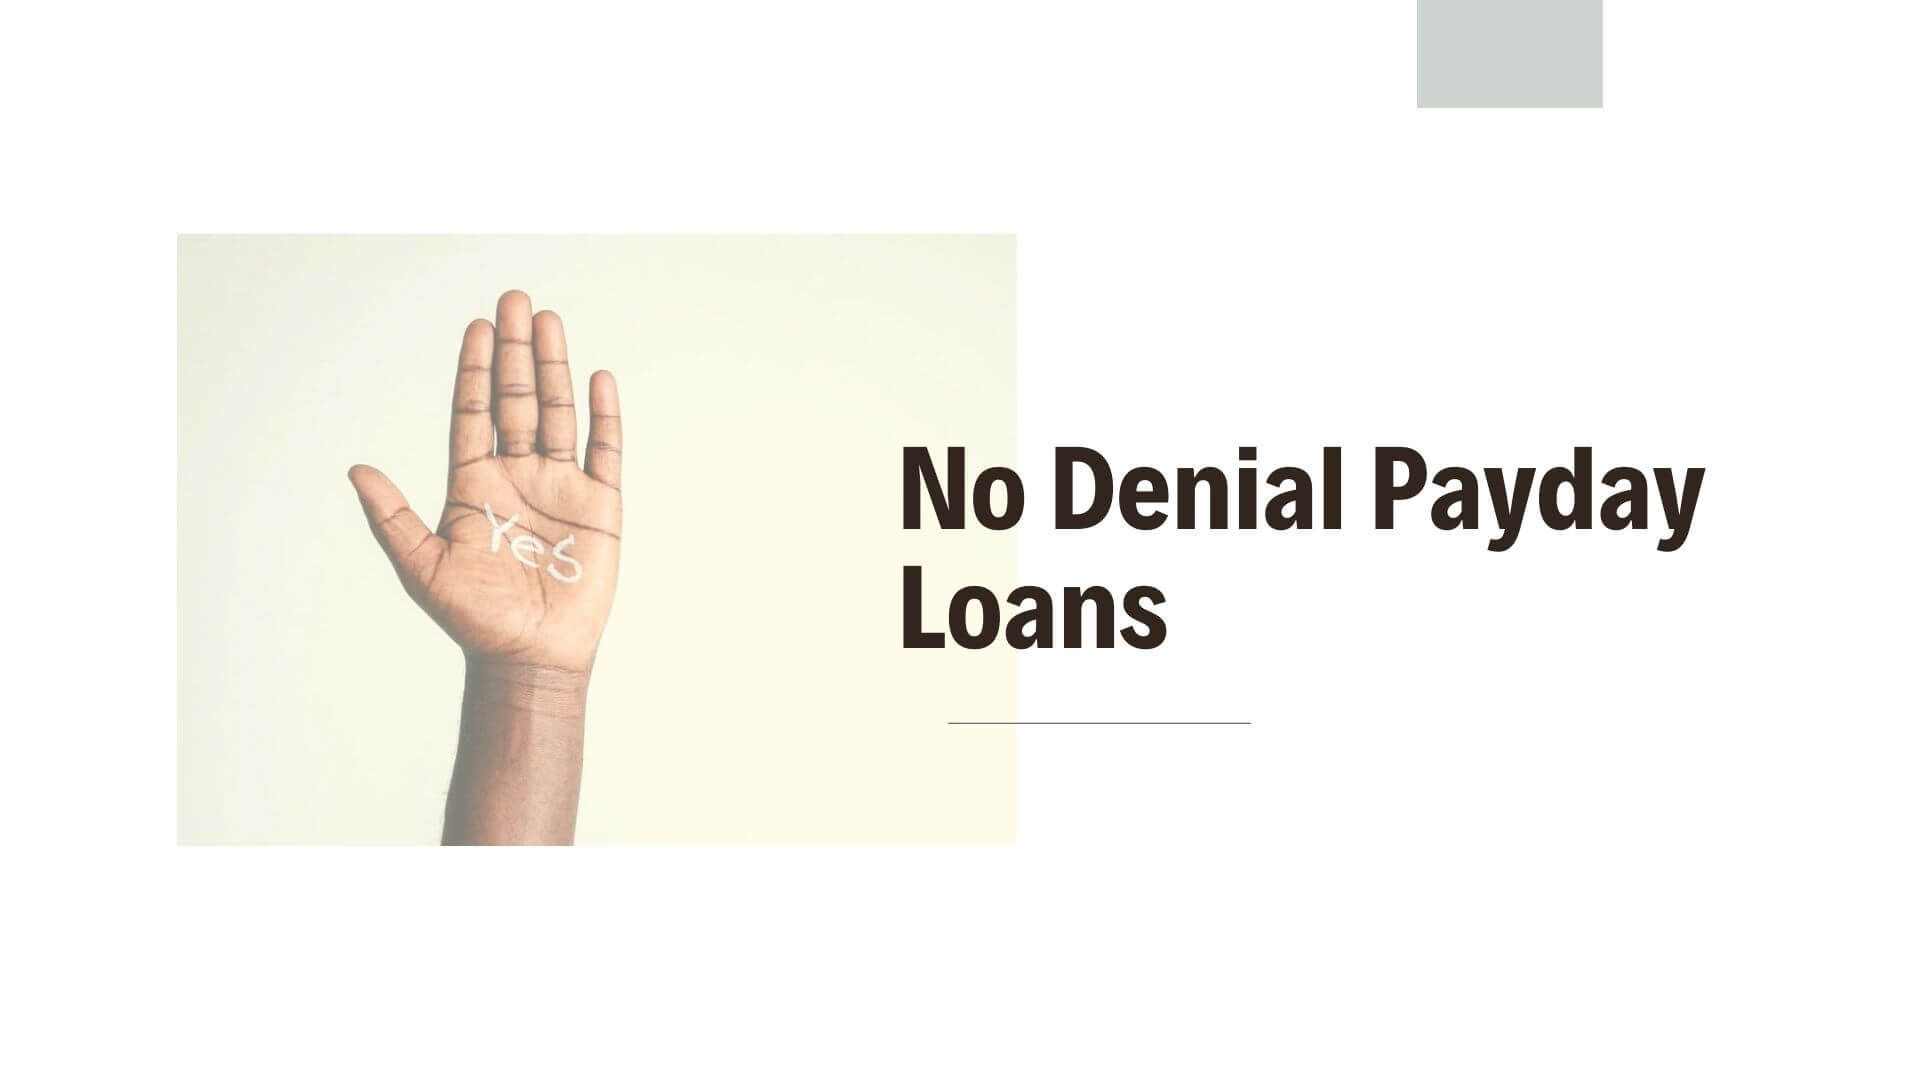 No Denial Payday Loans Direct Lenders Only- Paydayapr.com